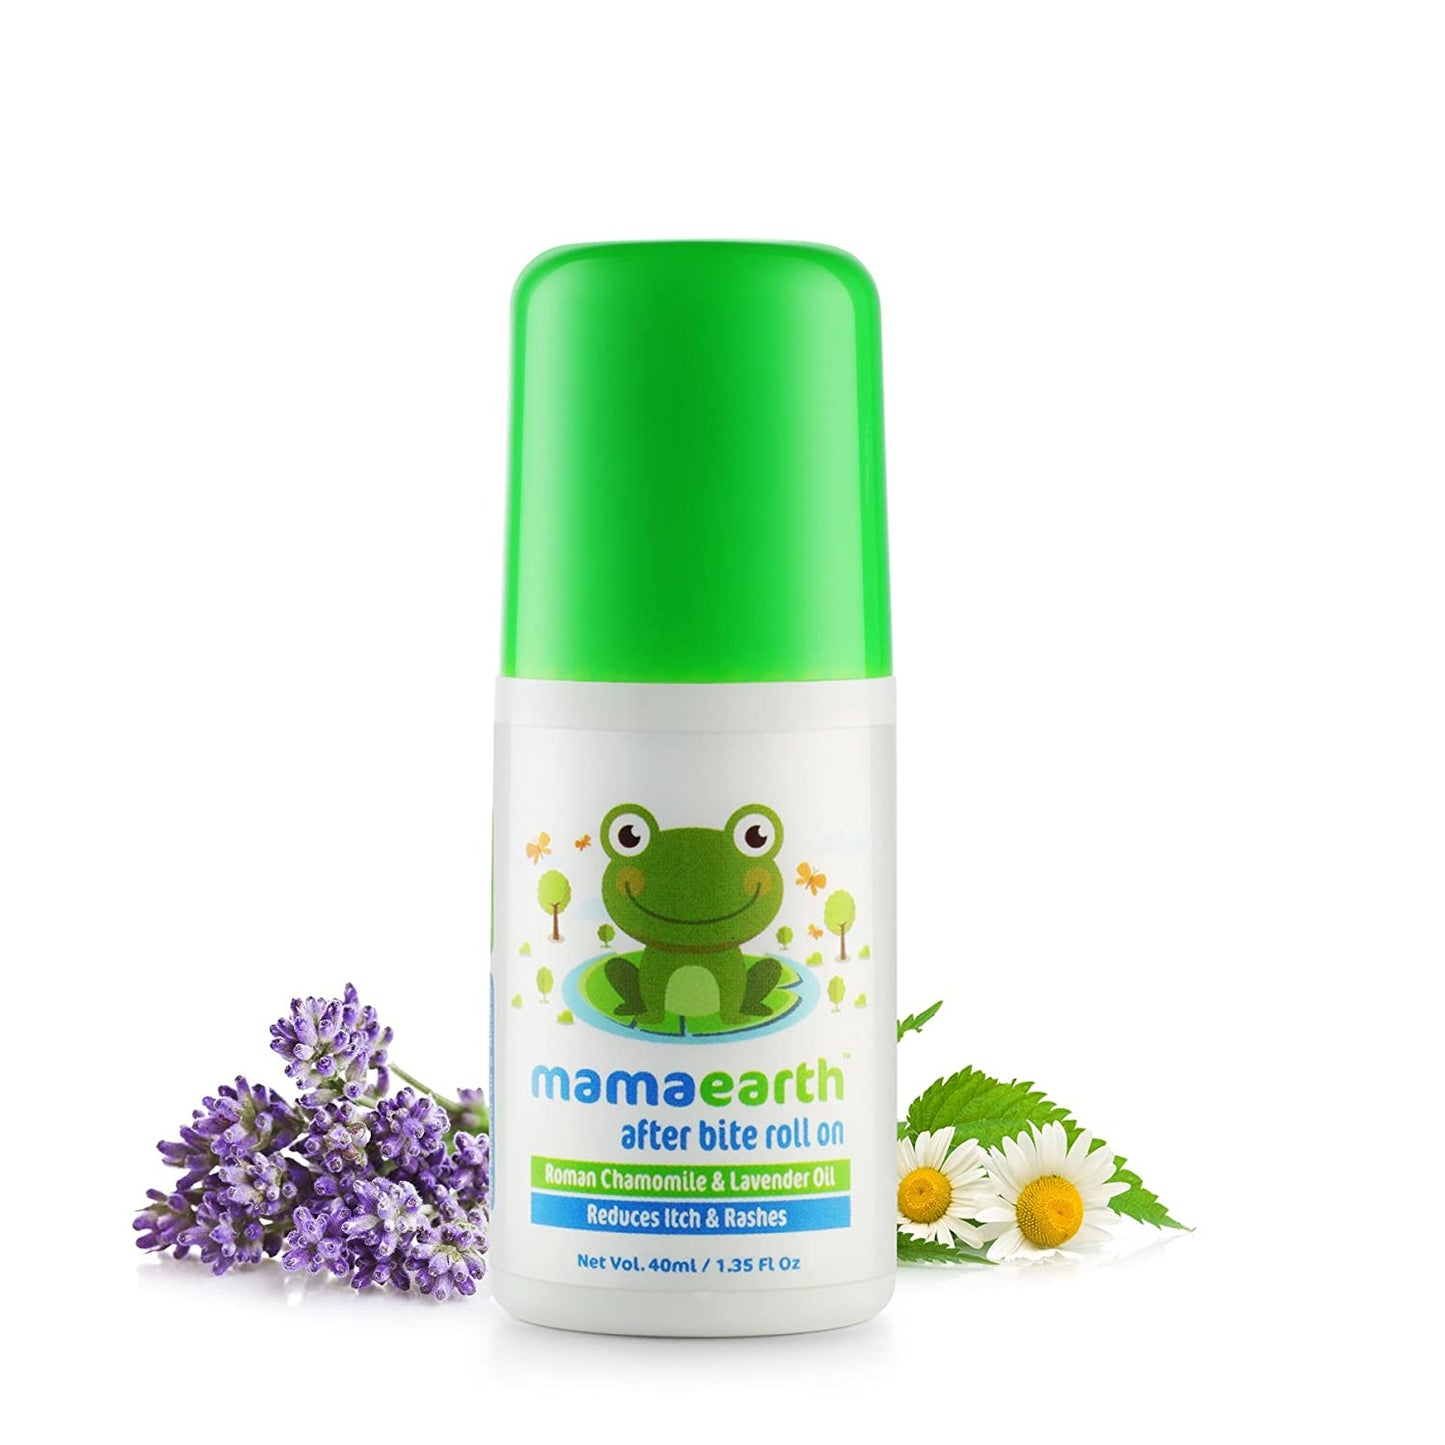 Mamaearth After Bite Roll On with Roman Chamomile & Lavender Oil for Kids and Babies, 40ml